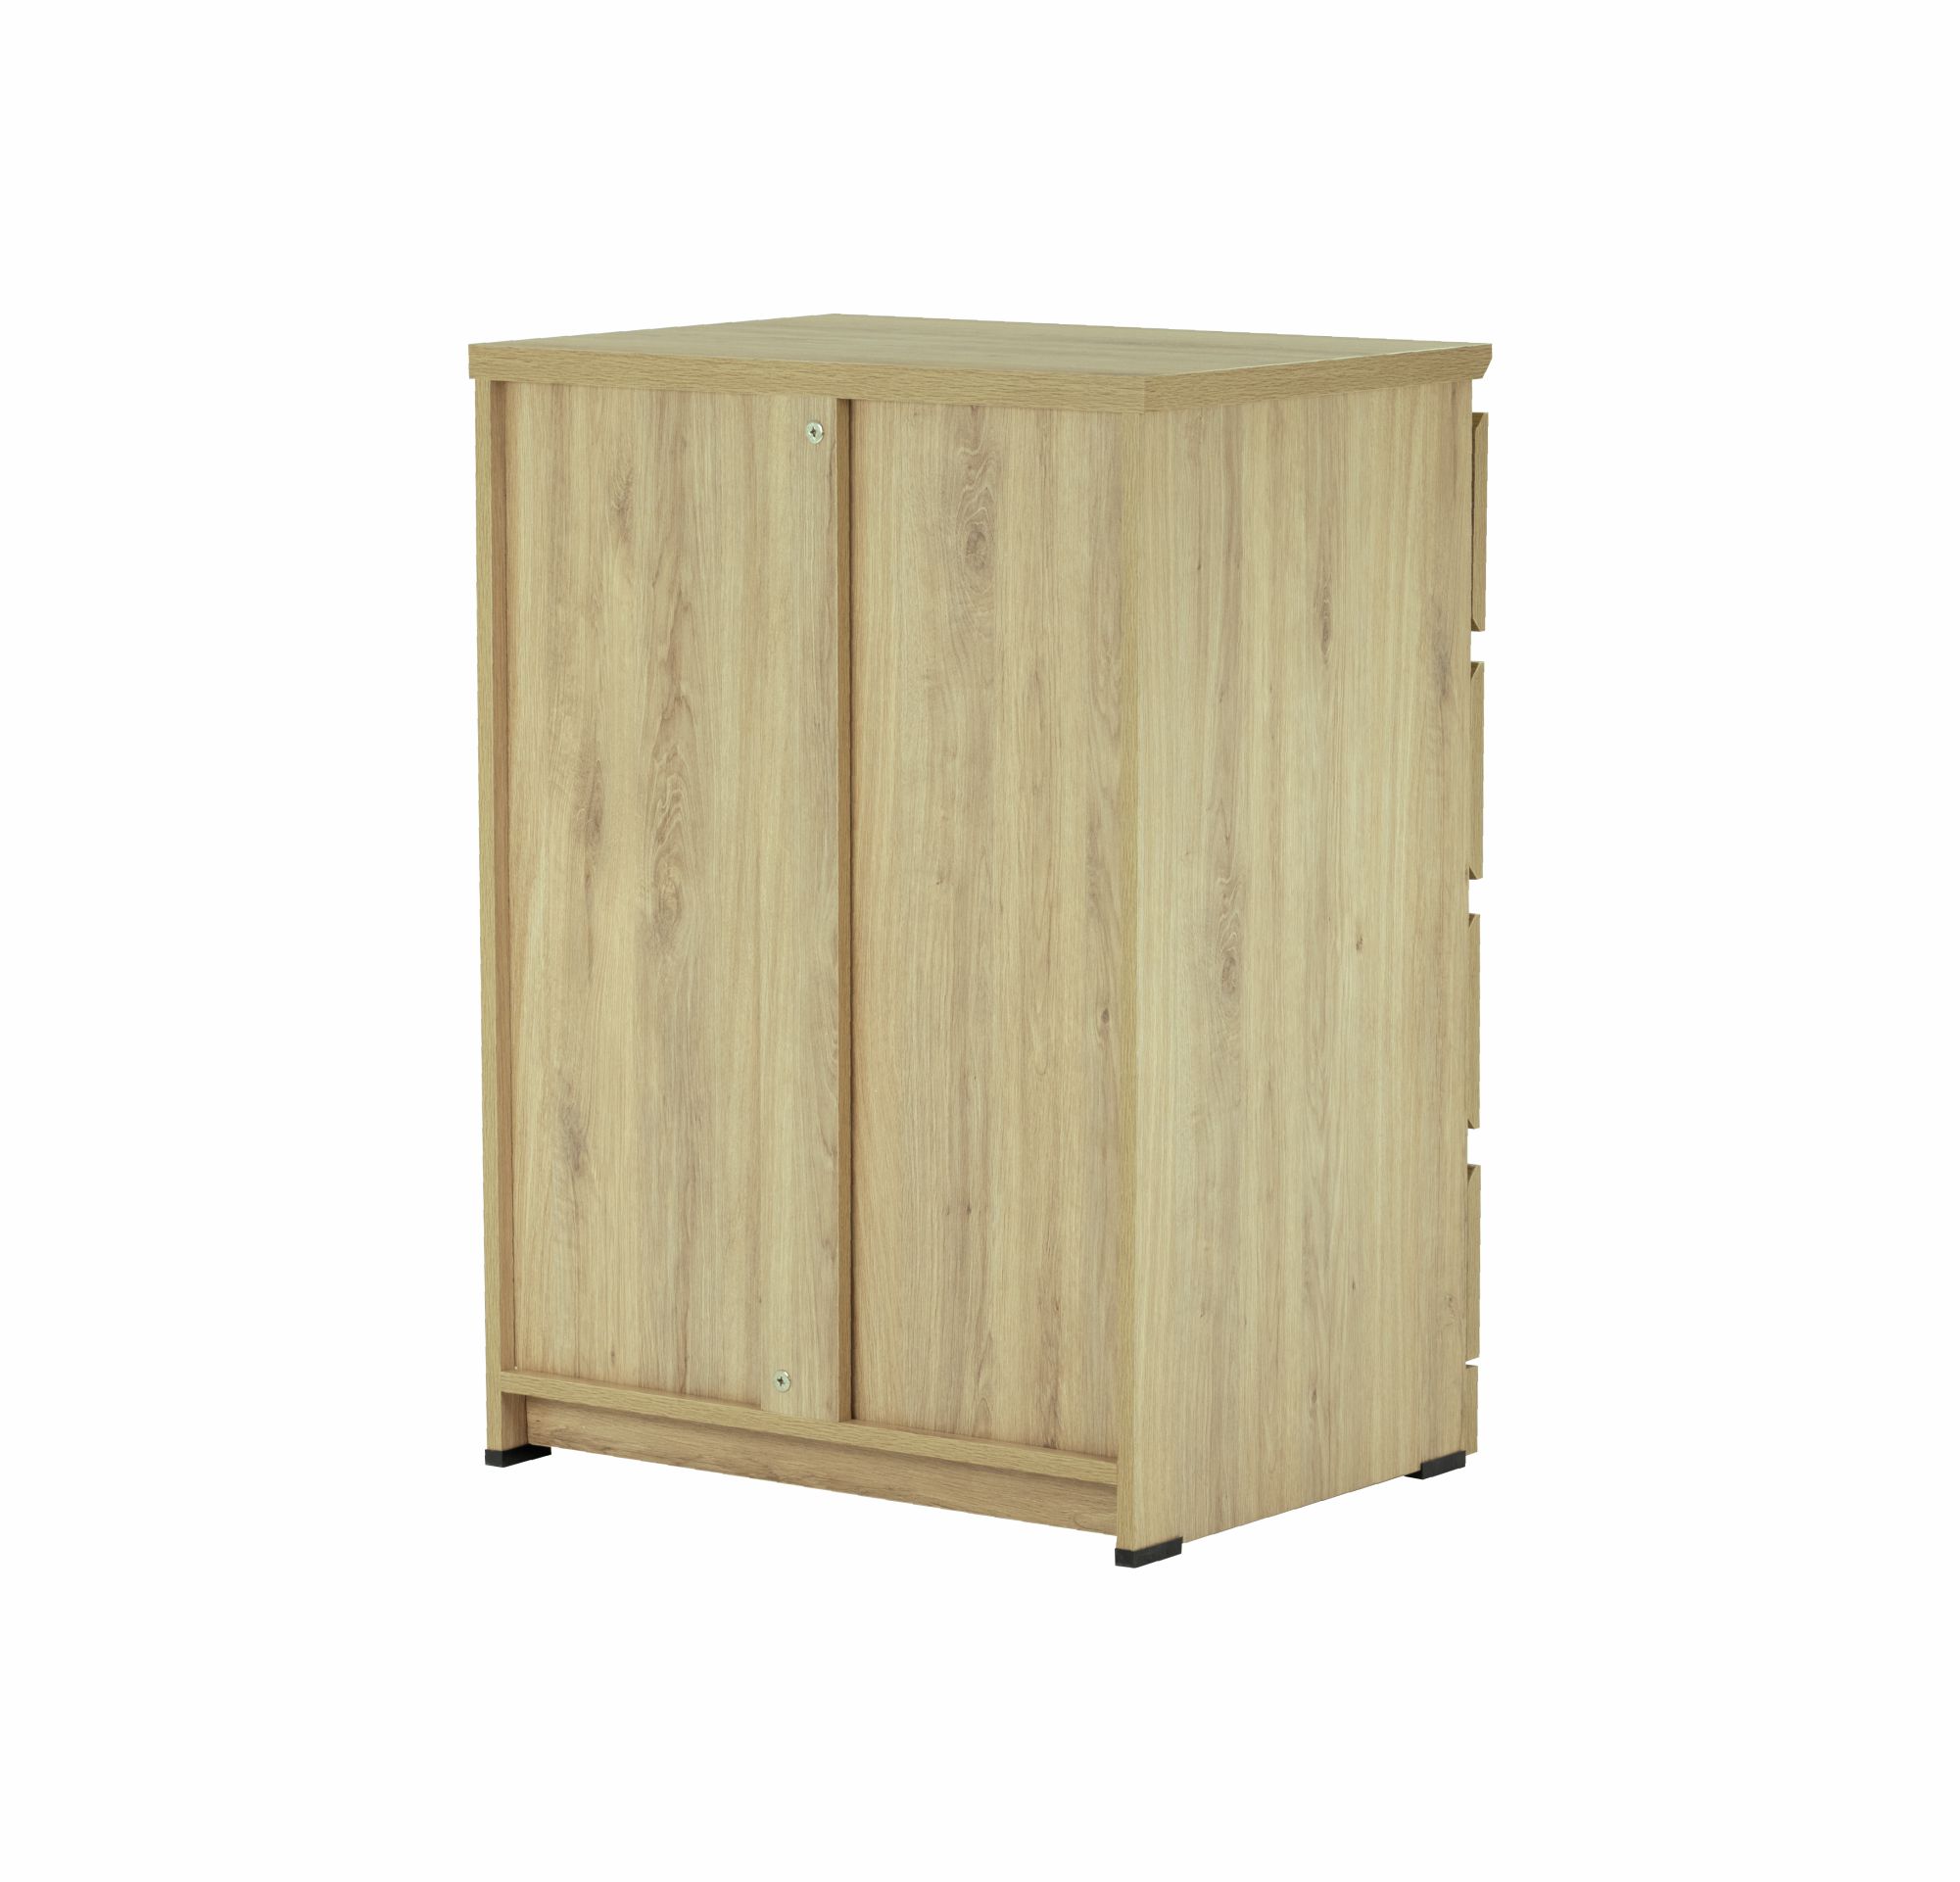 KDR007-Chest Of Drawers With 4 Drawers-M62/M50